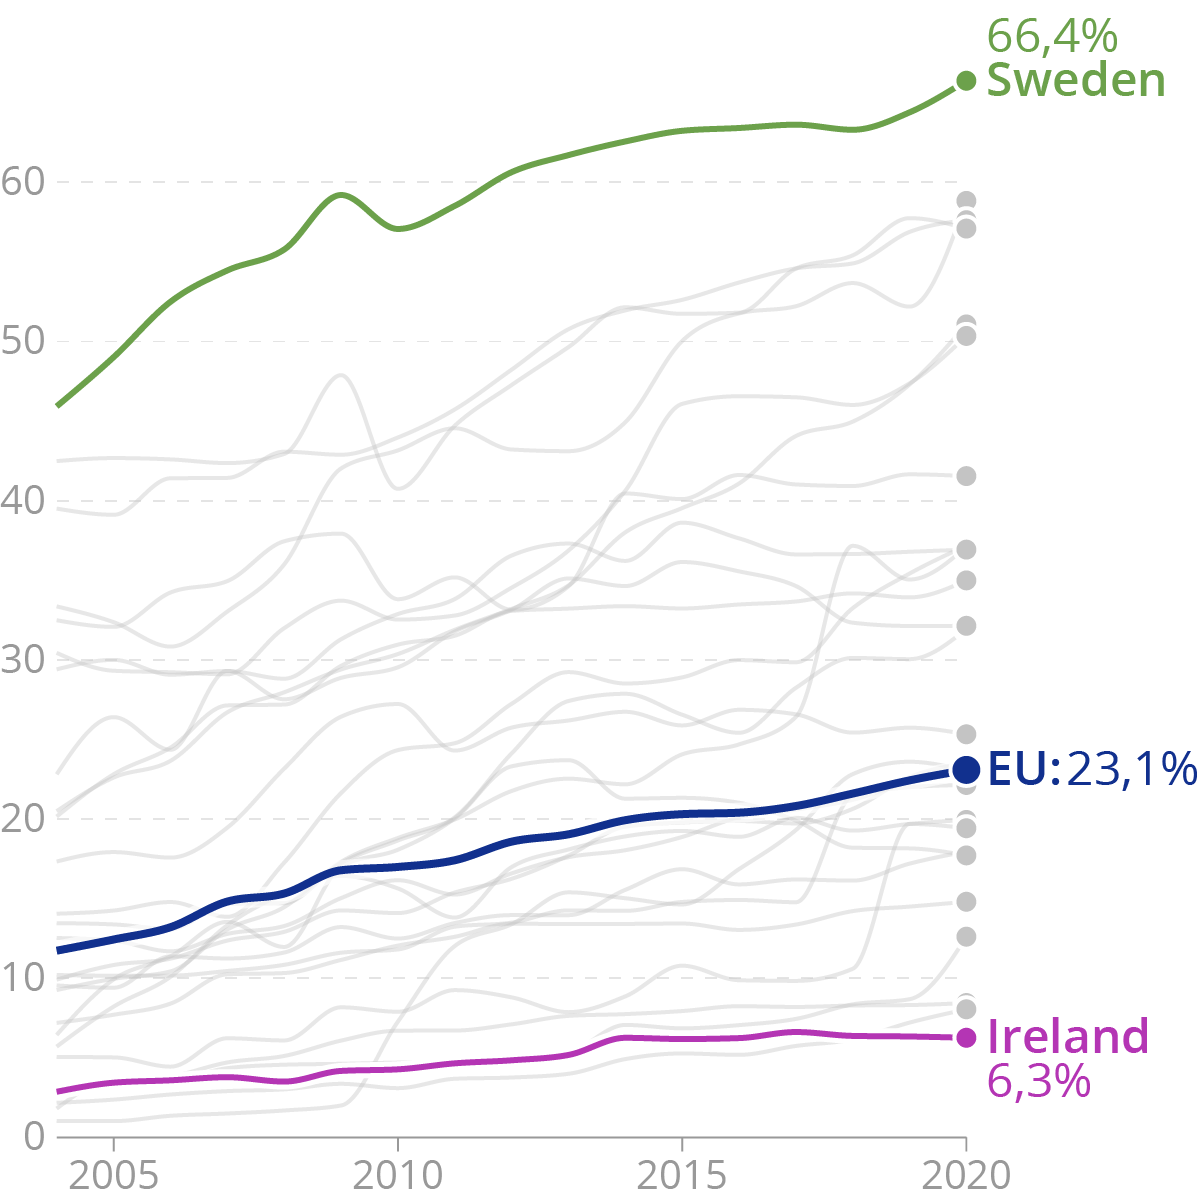 A line chart showing trends for the EU member states, with the lines for Sweden, Ireland and the EU average labelled and highlighted with colour